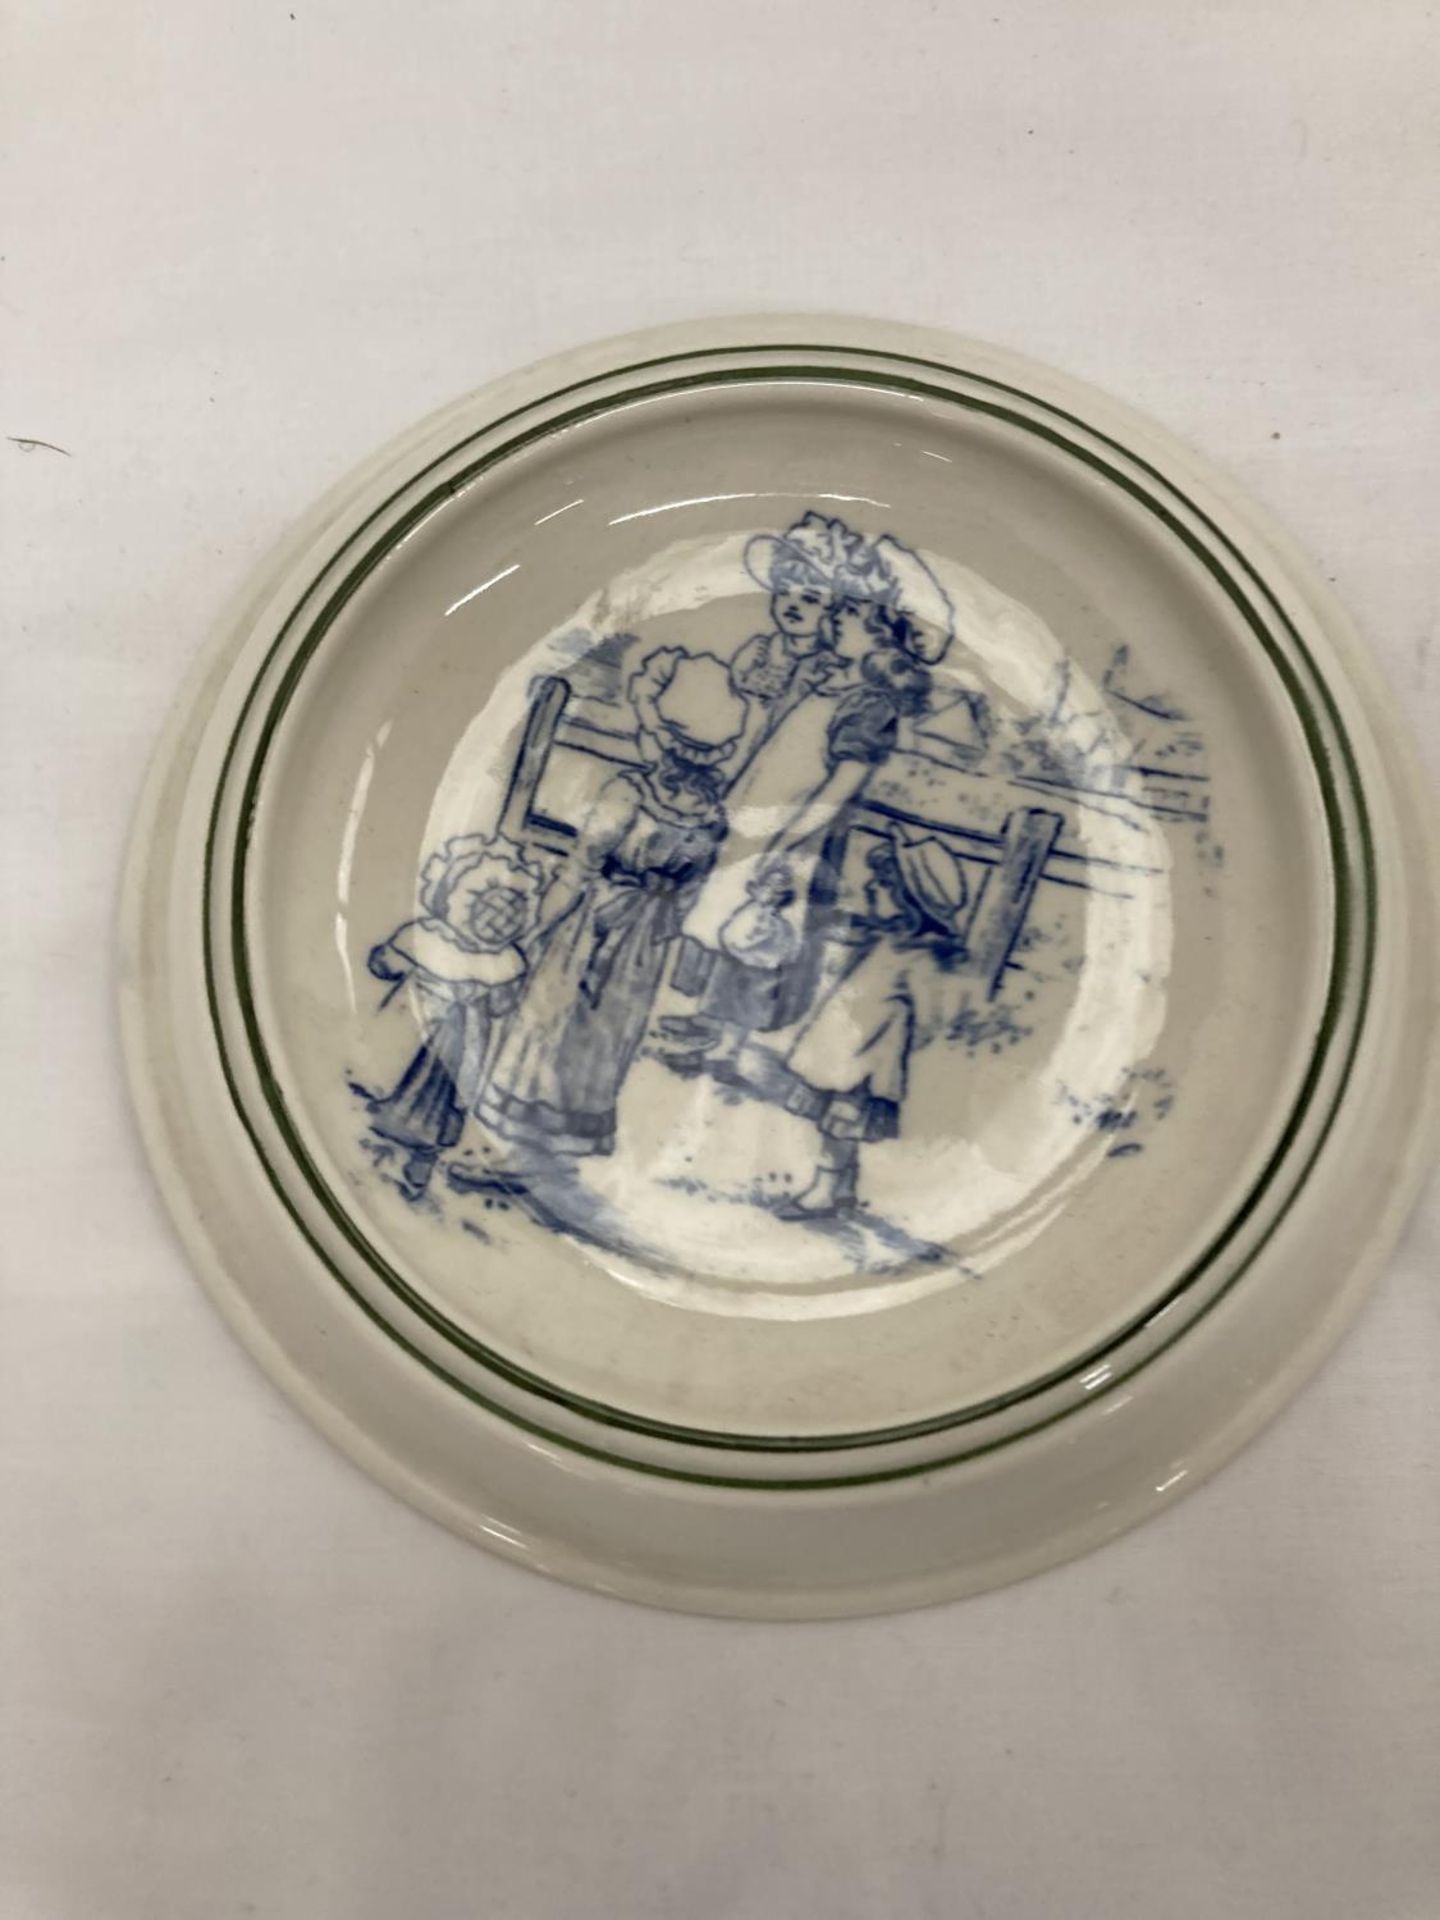 TWO 1891-1900 ROYAL DOULTON CHILD'S DISHES, ONE THE KATE GREENAWAY SERIES THE OTHER FLOWER FAIRIES - Image 6 of 8